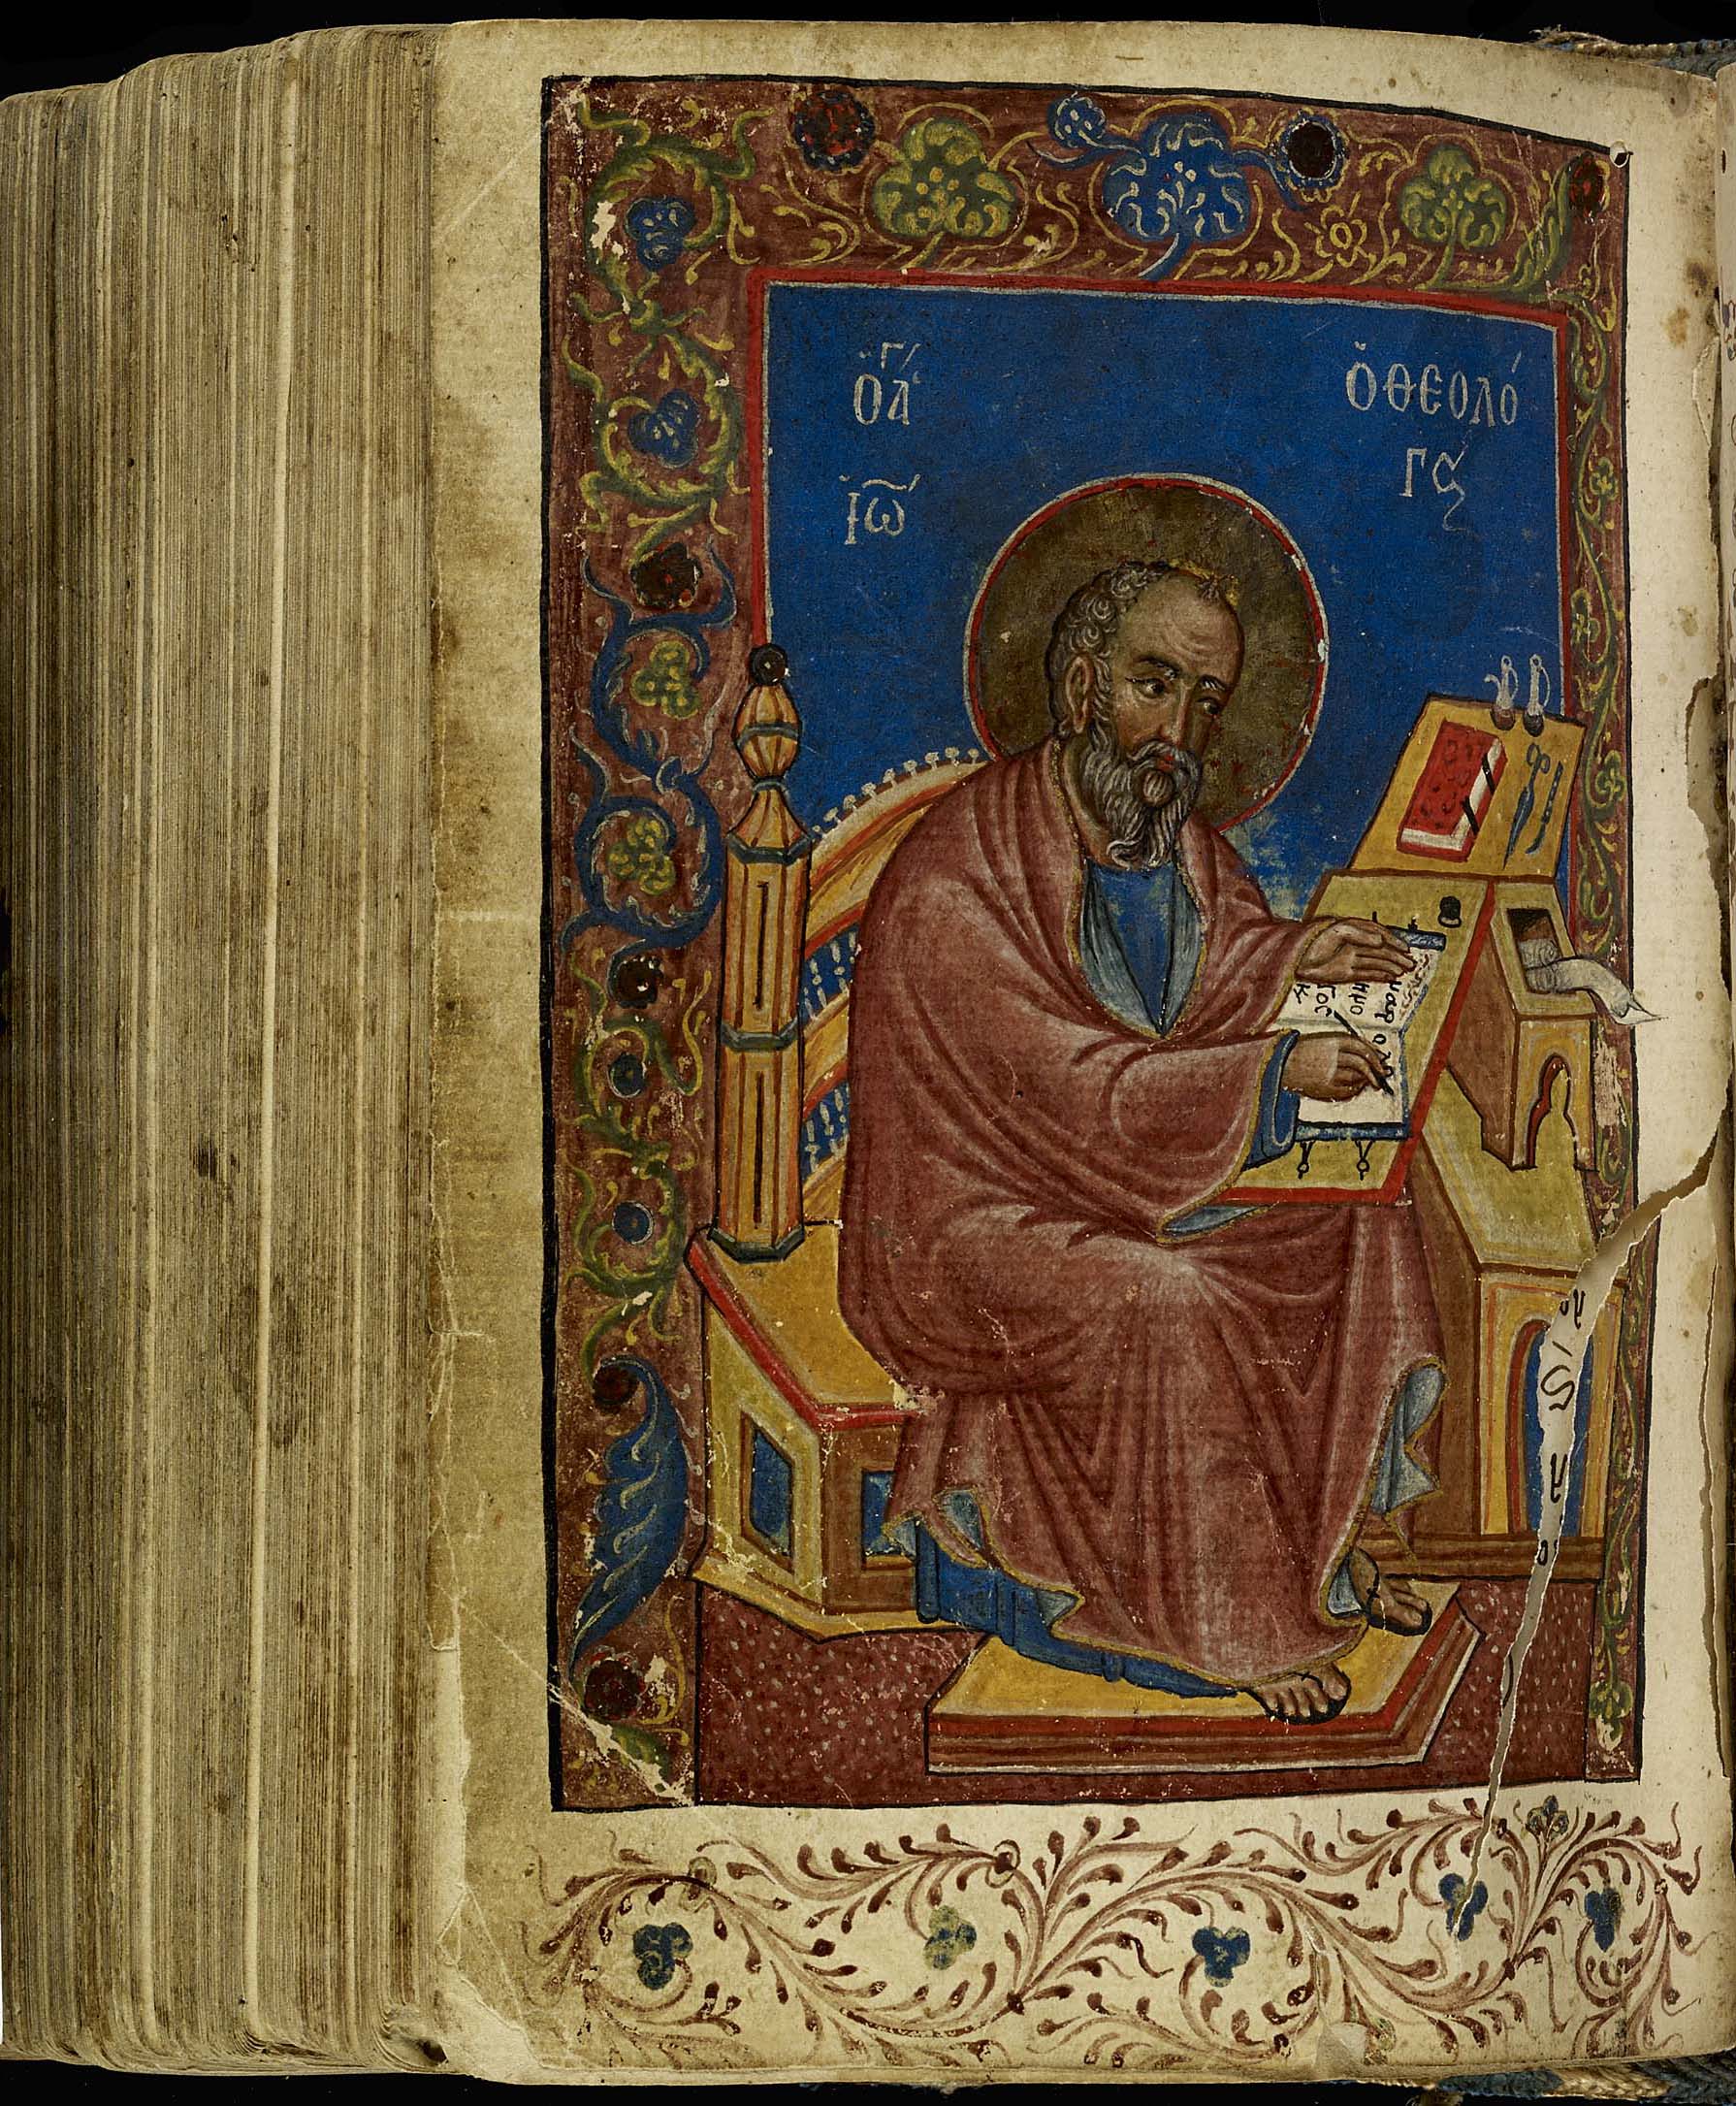 Mich. Ms. 30,  full illumination depicting John the Evangelist, fol. 306v. Gospels and biblical and patristic commentaries. [Northern Greece], May 31, 1430.